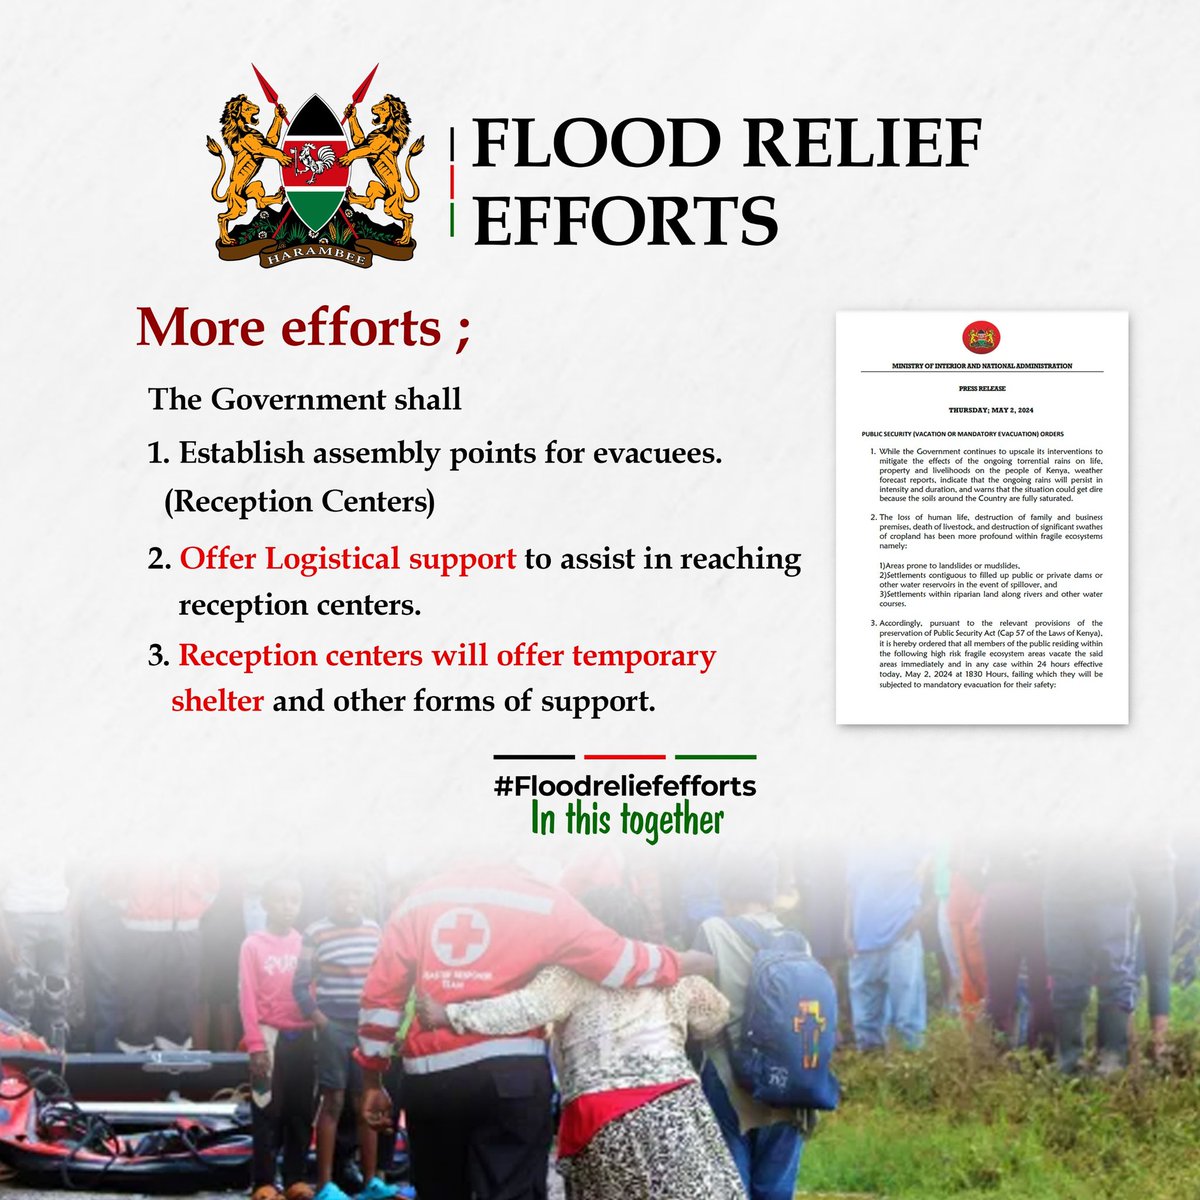 Providing incentives for homeowners to retrofit their properties with flood-resistant features, such as elevated foundations and flood vents. #FloodReliefEfforts In It Together